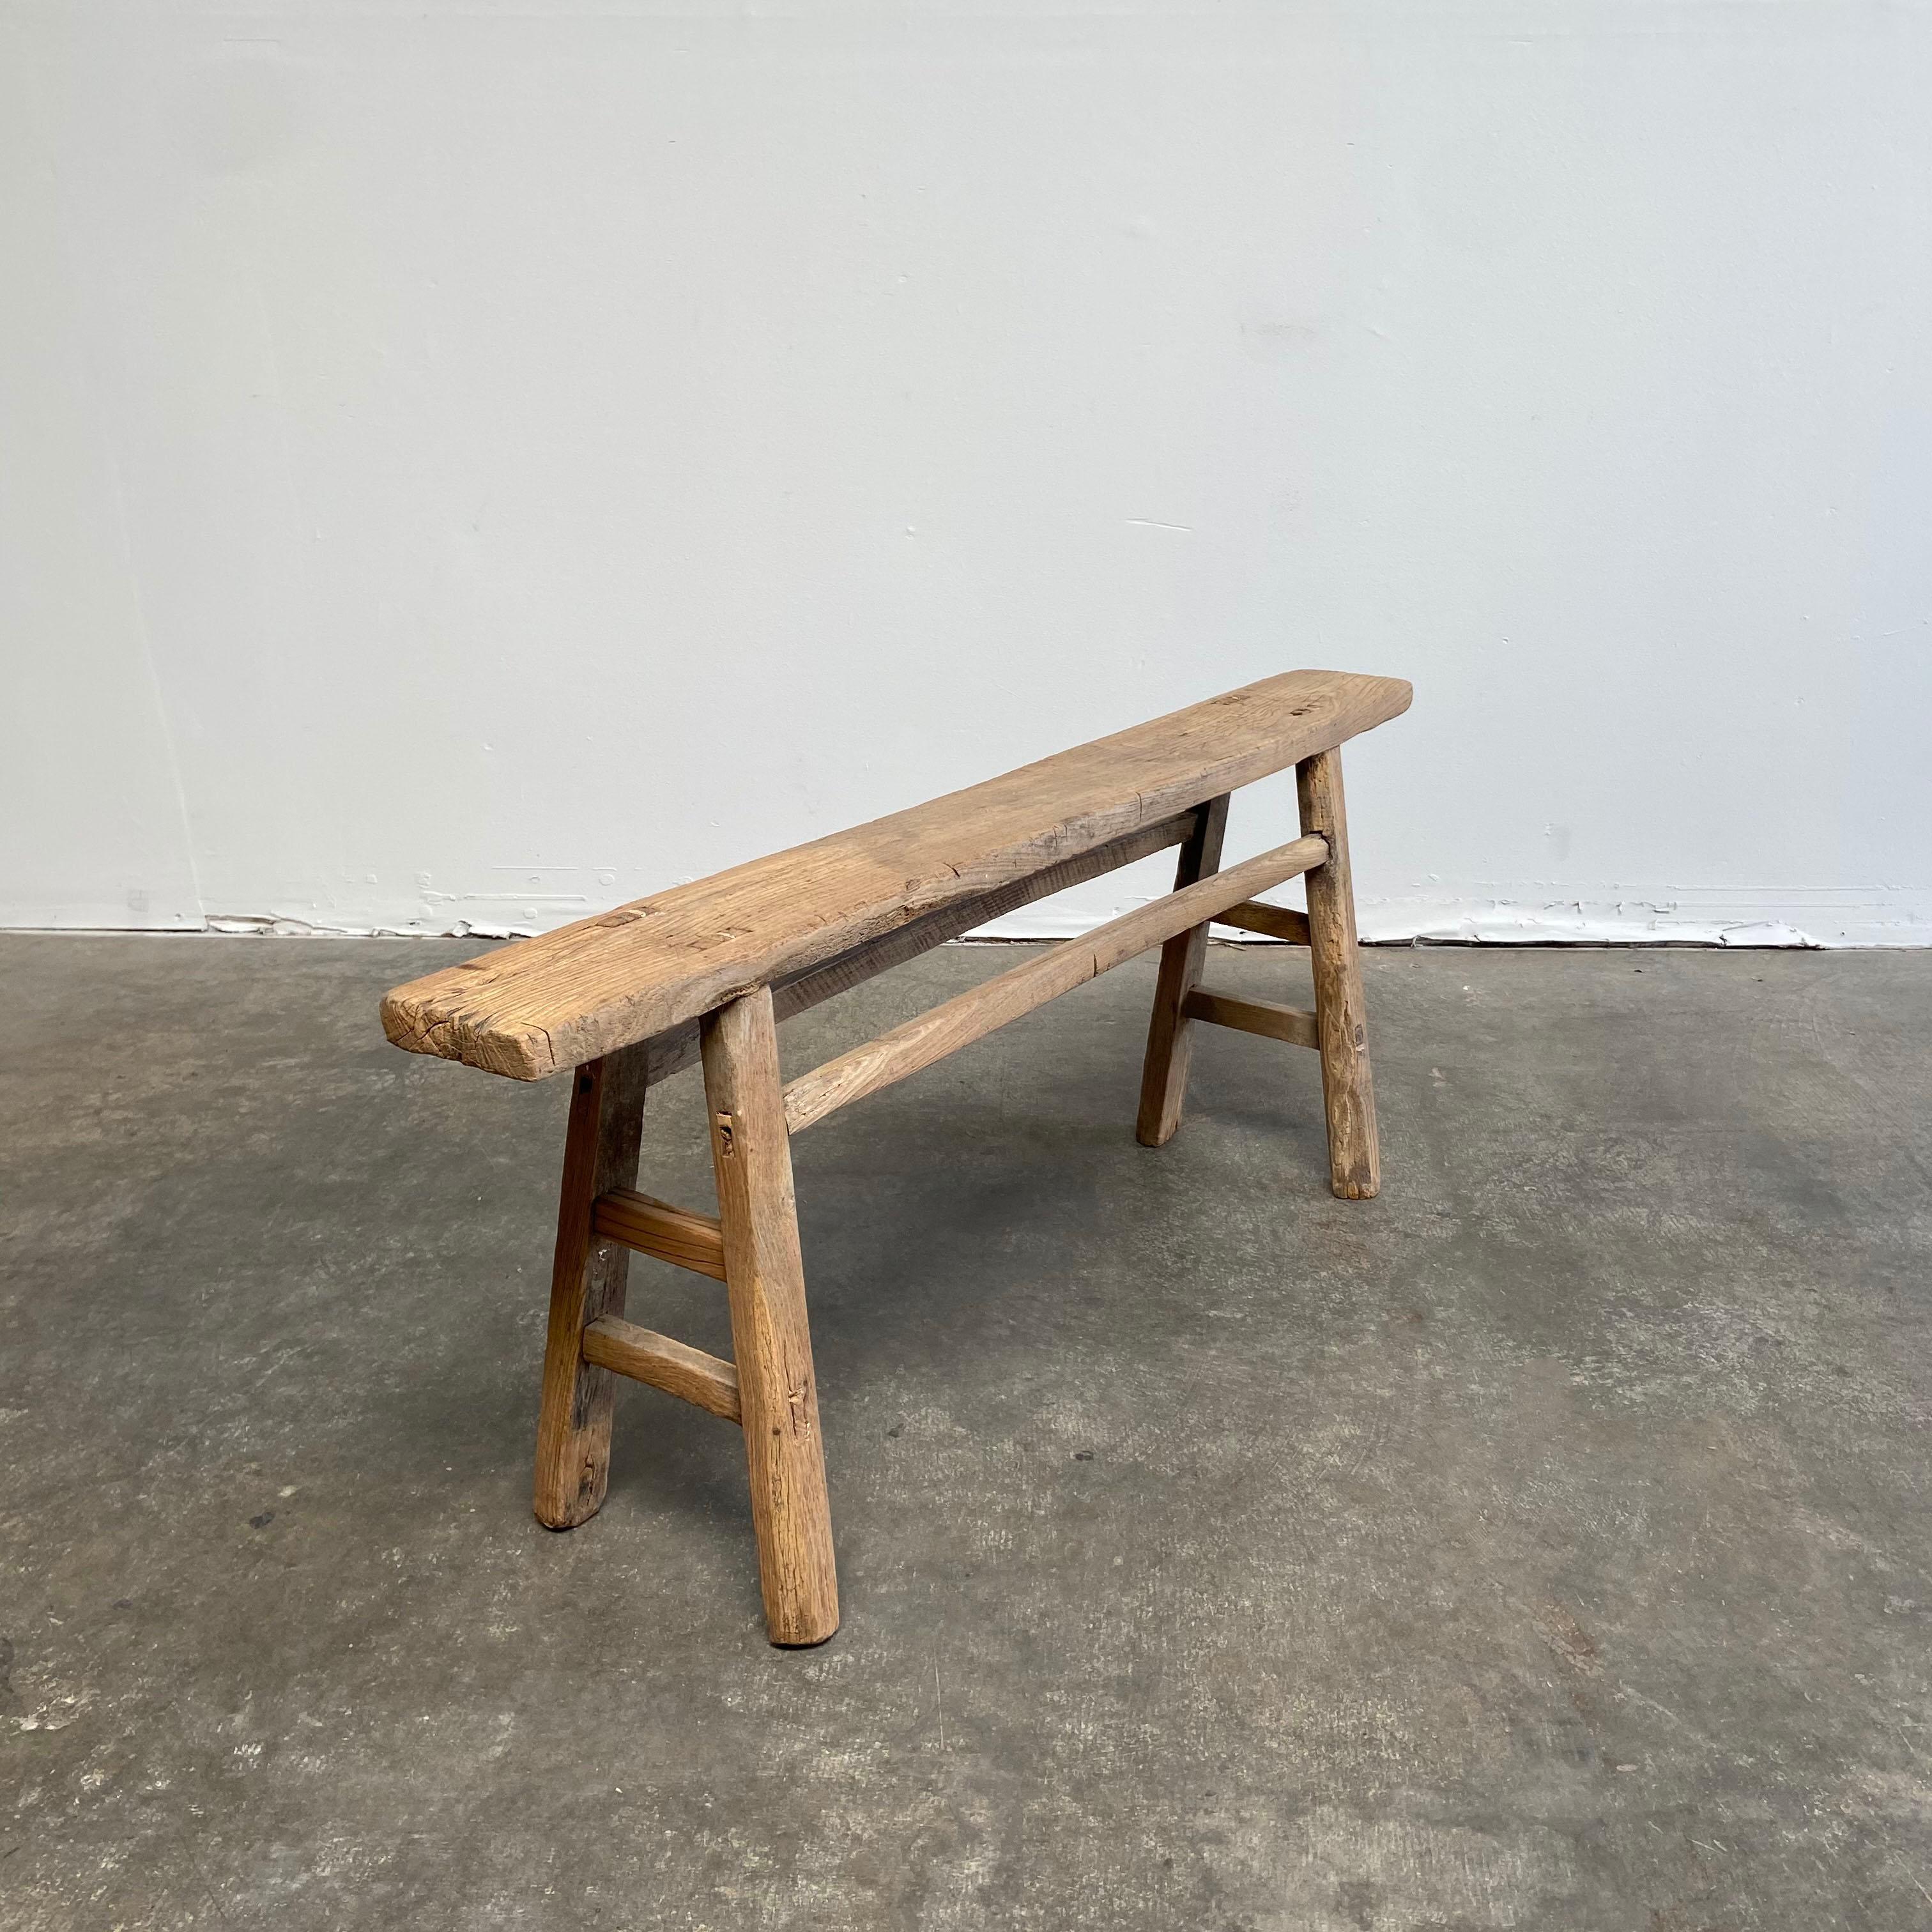 Skinny bench
Vintage antique elm wood bench
These are the real vintage antique elm wood benches! Beautiful antique patina, with weathering and age, these are solid and sturdy ready for daily use, use as a table behind a sofa, stool, coffee table,